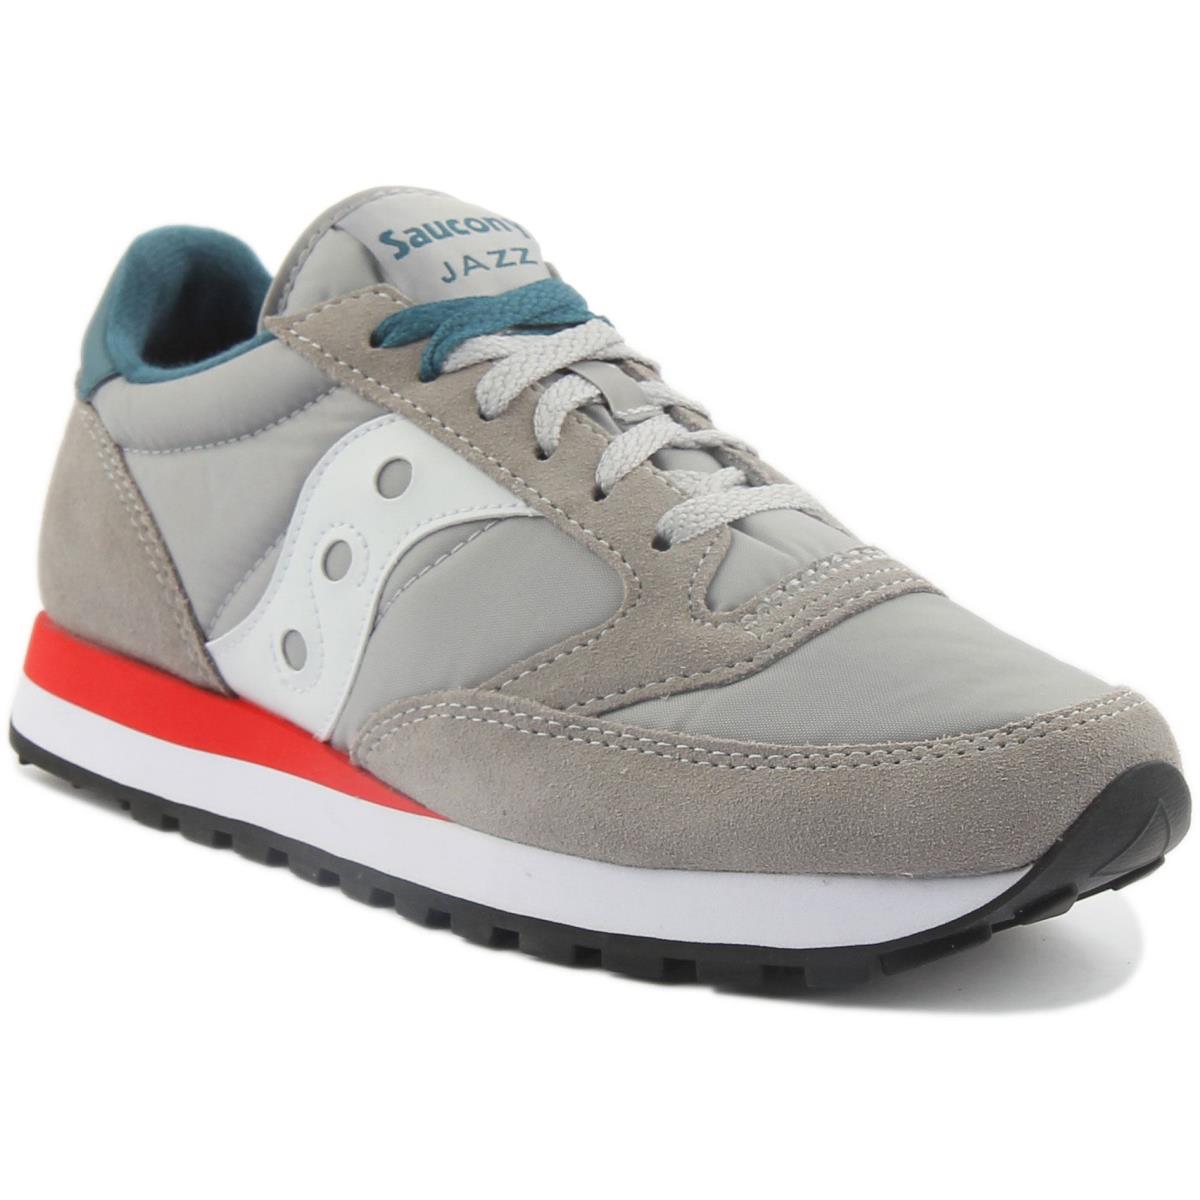 Saucony Jazz Mens Lace Up Retro Sneakers In Light Grey Size US 7 - 13 LIGHT GREY